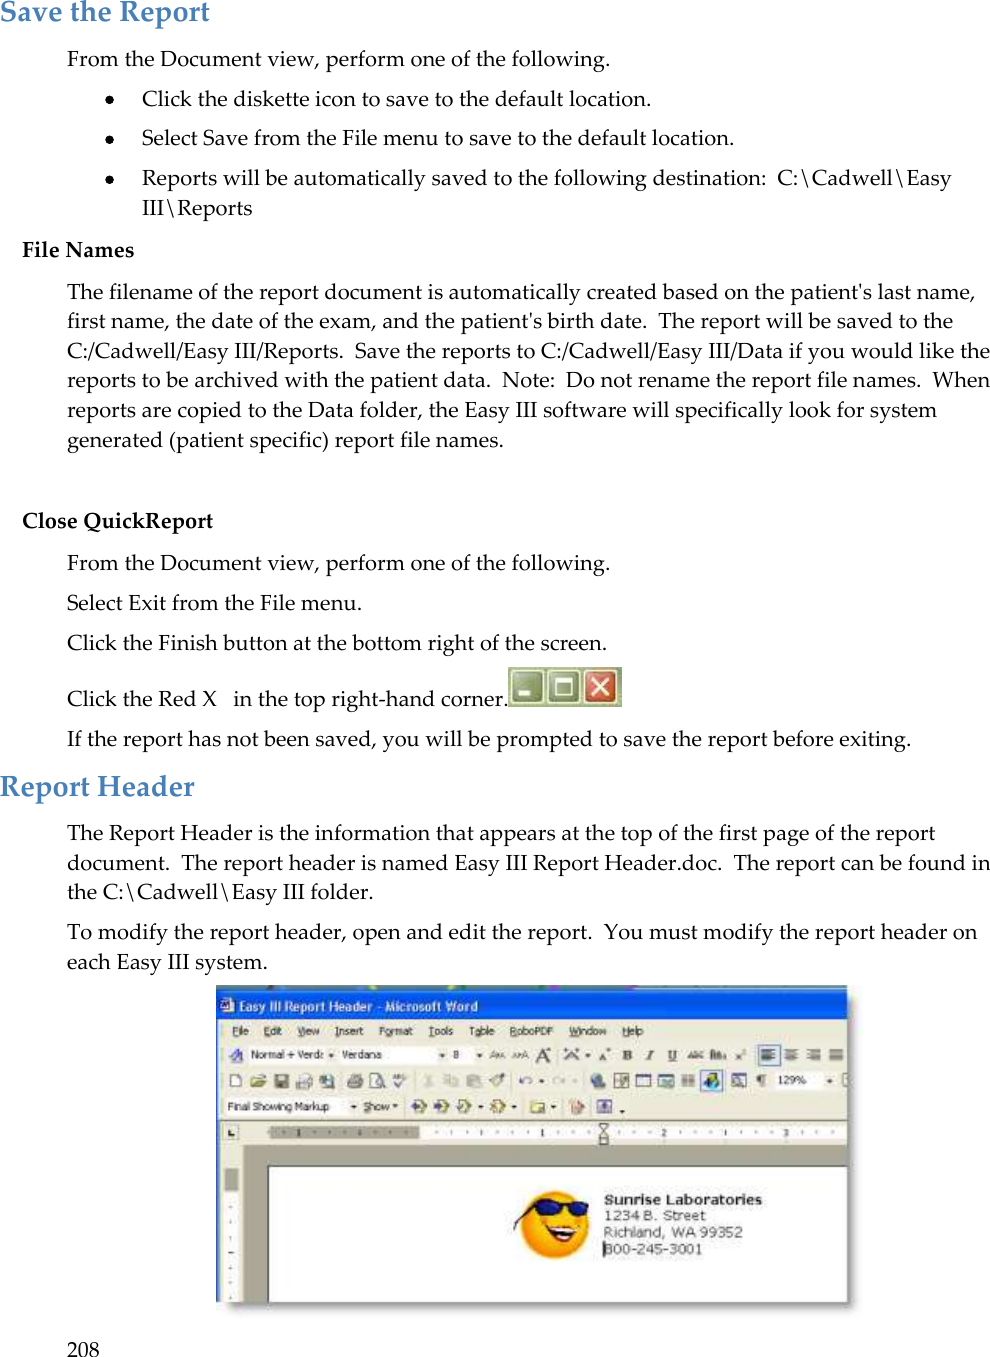 208  Save the Report From the Document view, perform one of the following.  Click the diskette icon to save to the default location.  Select Save from the File menu to save to the default location.  Reports will be automatically saved to the following destination:  C:\Cadwell\Easy III\Reports File Names The filename of the report document is automatically created based on the patient&apos;s last name, first name, the date of the exam, and the patient&apos;s birth date.  The report will be saved to the C:/Cadwell/Easy III/Reports.  Save the reports to C:/Cadwell/Easy III/Data if you would like the reports to be archived with the patient data.  Note:  Do not rename the report file names.  When reports are copied to the Data folder, the Easy III software will specifically look for system generated (patient specific) report file names.  Close QuickReport From the Document view, perform one of the following. Select Exit from the File menu. Click the Finish button at the bottom right of the screen. Click the Red X   in the top right-hand corner.  If the report has not been saved, you will be prompted to save the report before exiting. Report Header The Report Header is the information that appears at the top of the first page of the report document.  The report header is named Easy III Report Header.doc.  The report can be found in the C:\Cadwell\Easy III folder. To modify the report header, open and edit the report.  You must modify the report header on each Easy III system.  